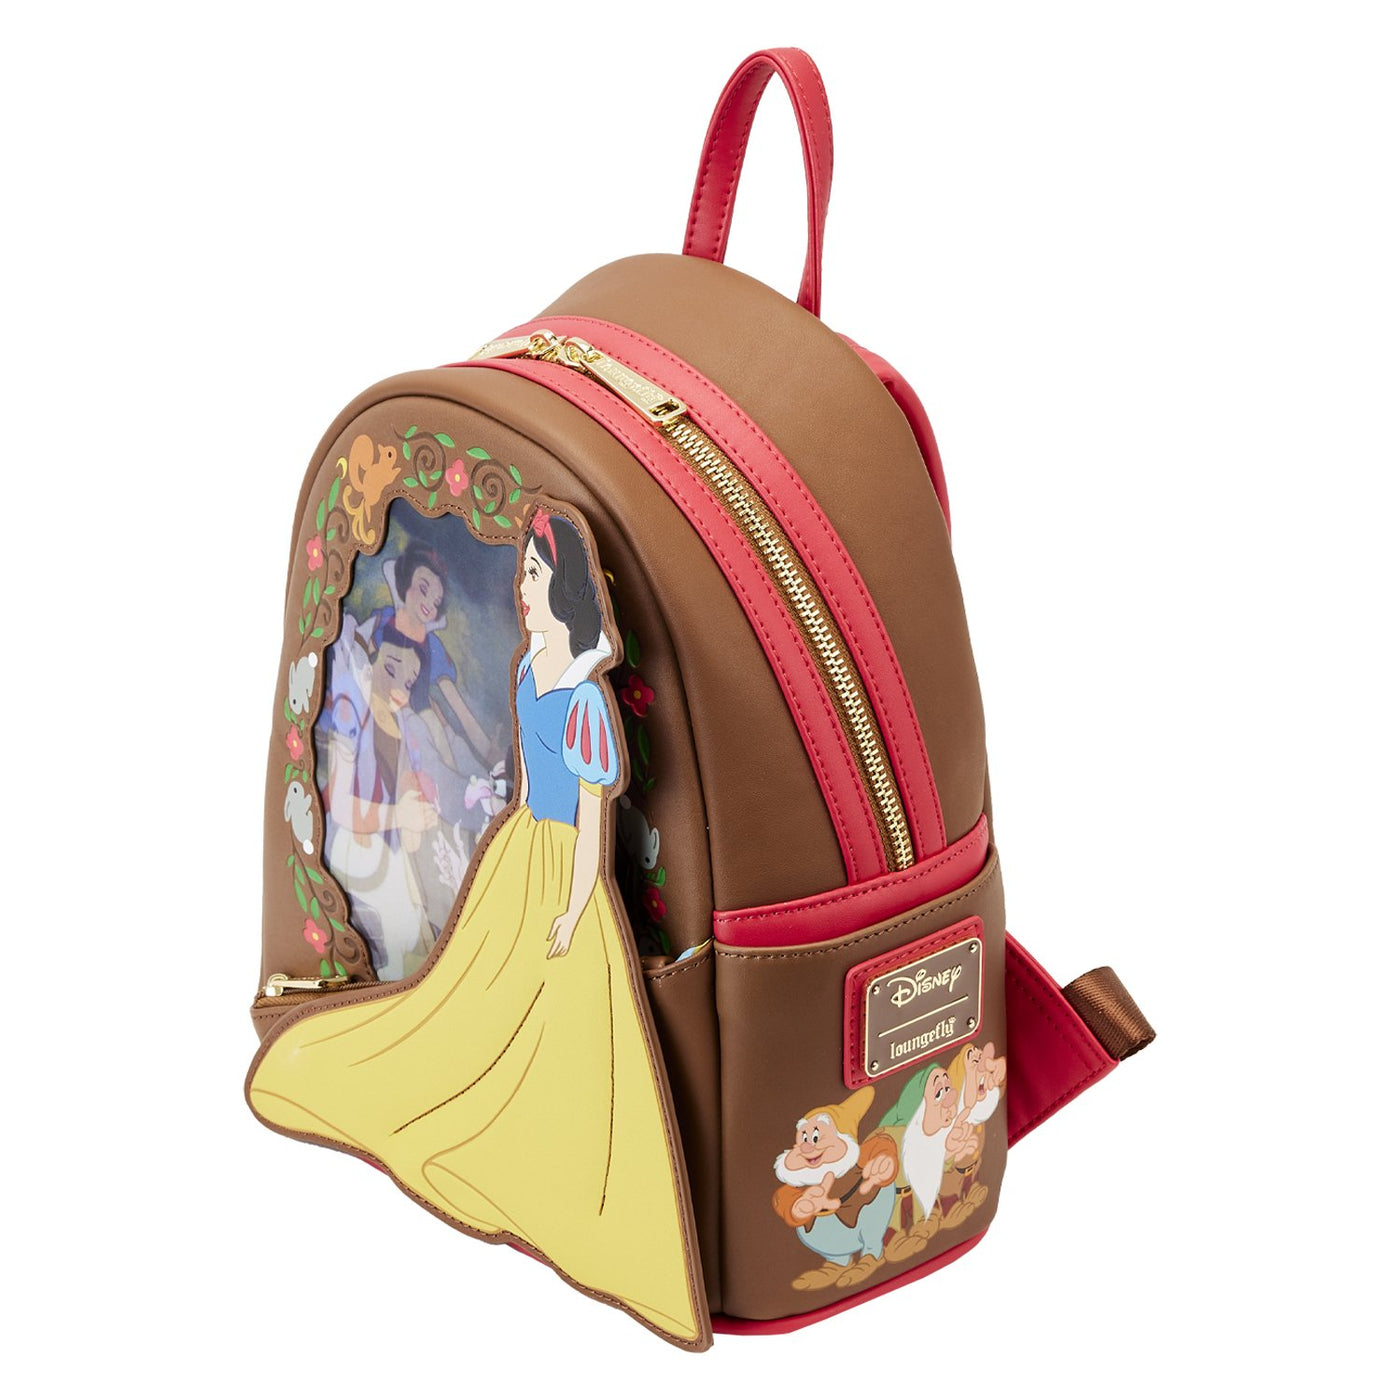 707 Street Exclusive - Loungefly Disney Snow White and the Seven Dwarf